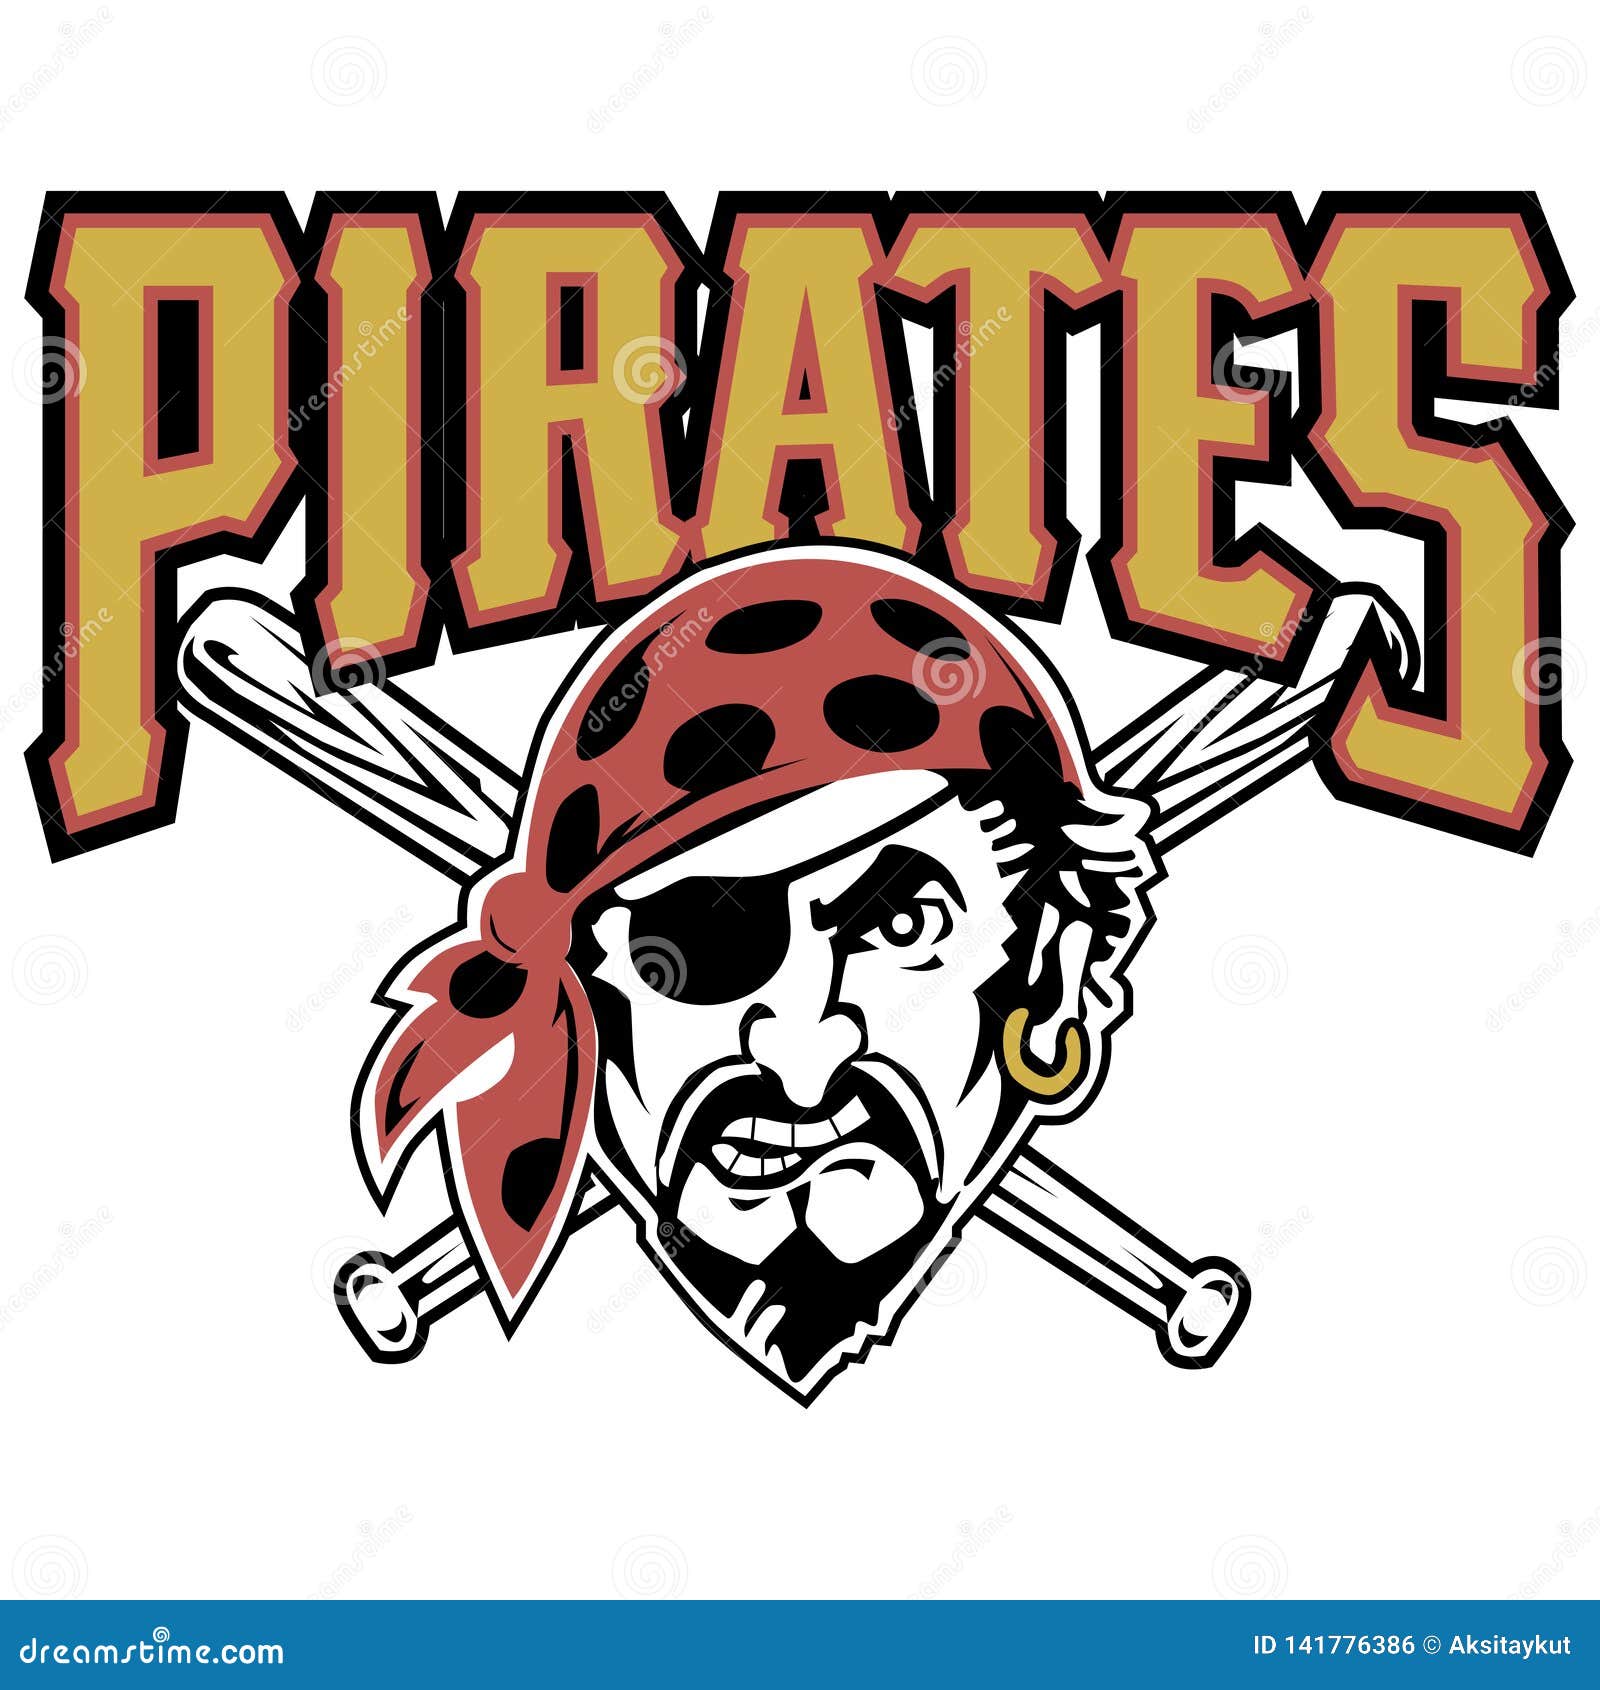 vector pittsburgh pirates font